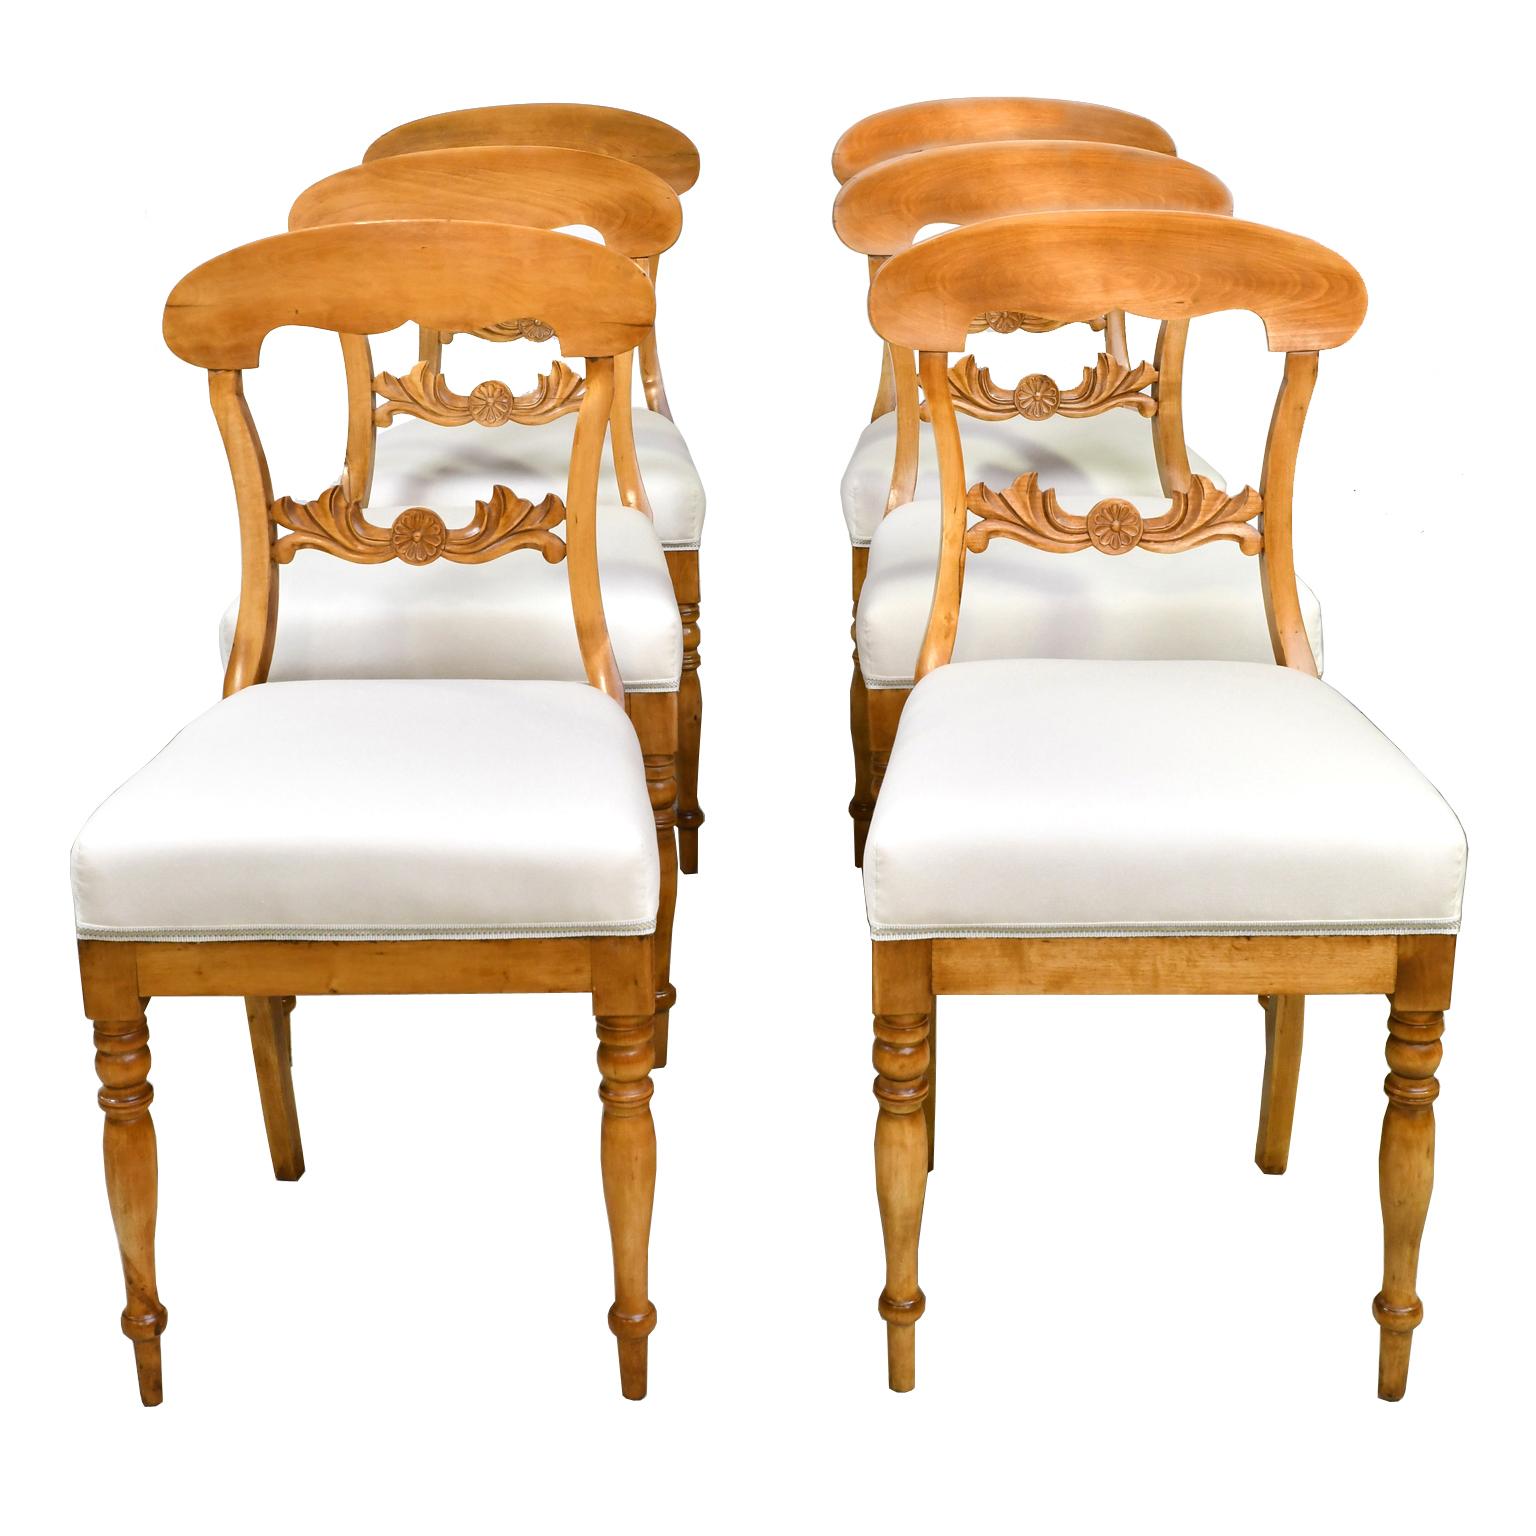 A lovely set of six Karl Johan dining chairs in a light, honey-colored birch wood with newly upholstered seat. Chairs have an arched crest rail, carved acanthus and rosette on back rail, turned front legs and saber rear legs, Sweden, circa 1825.